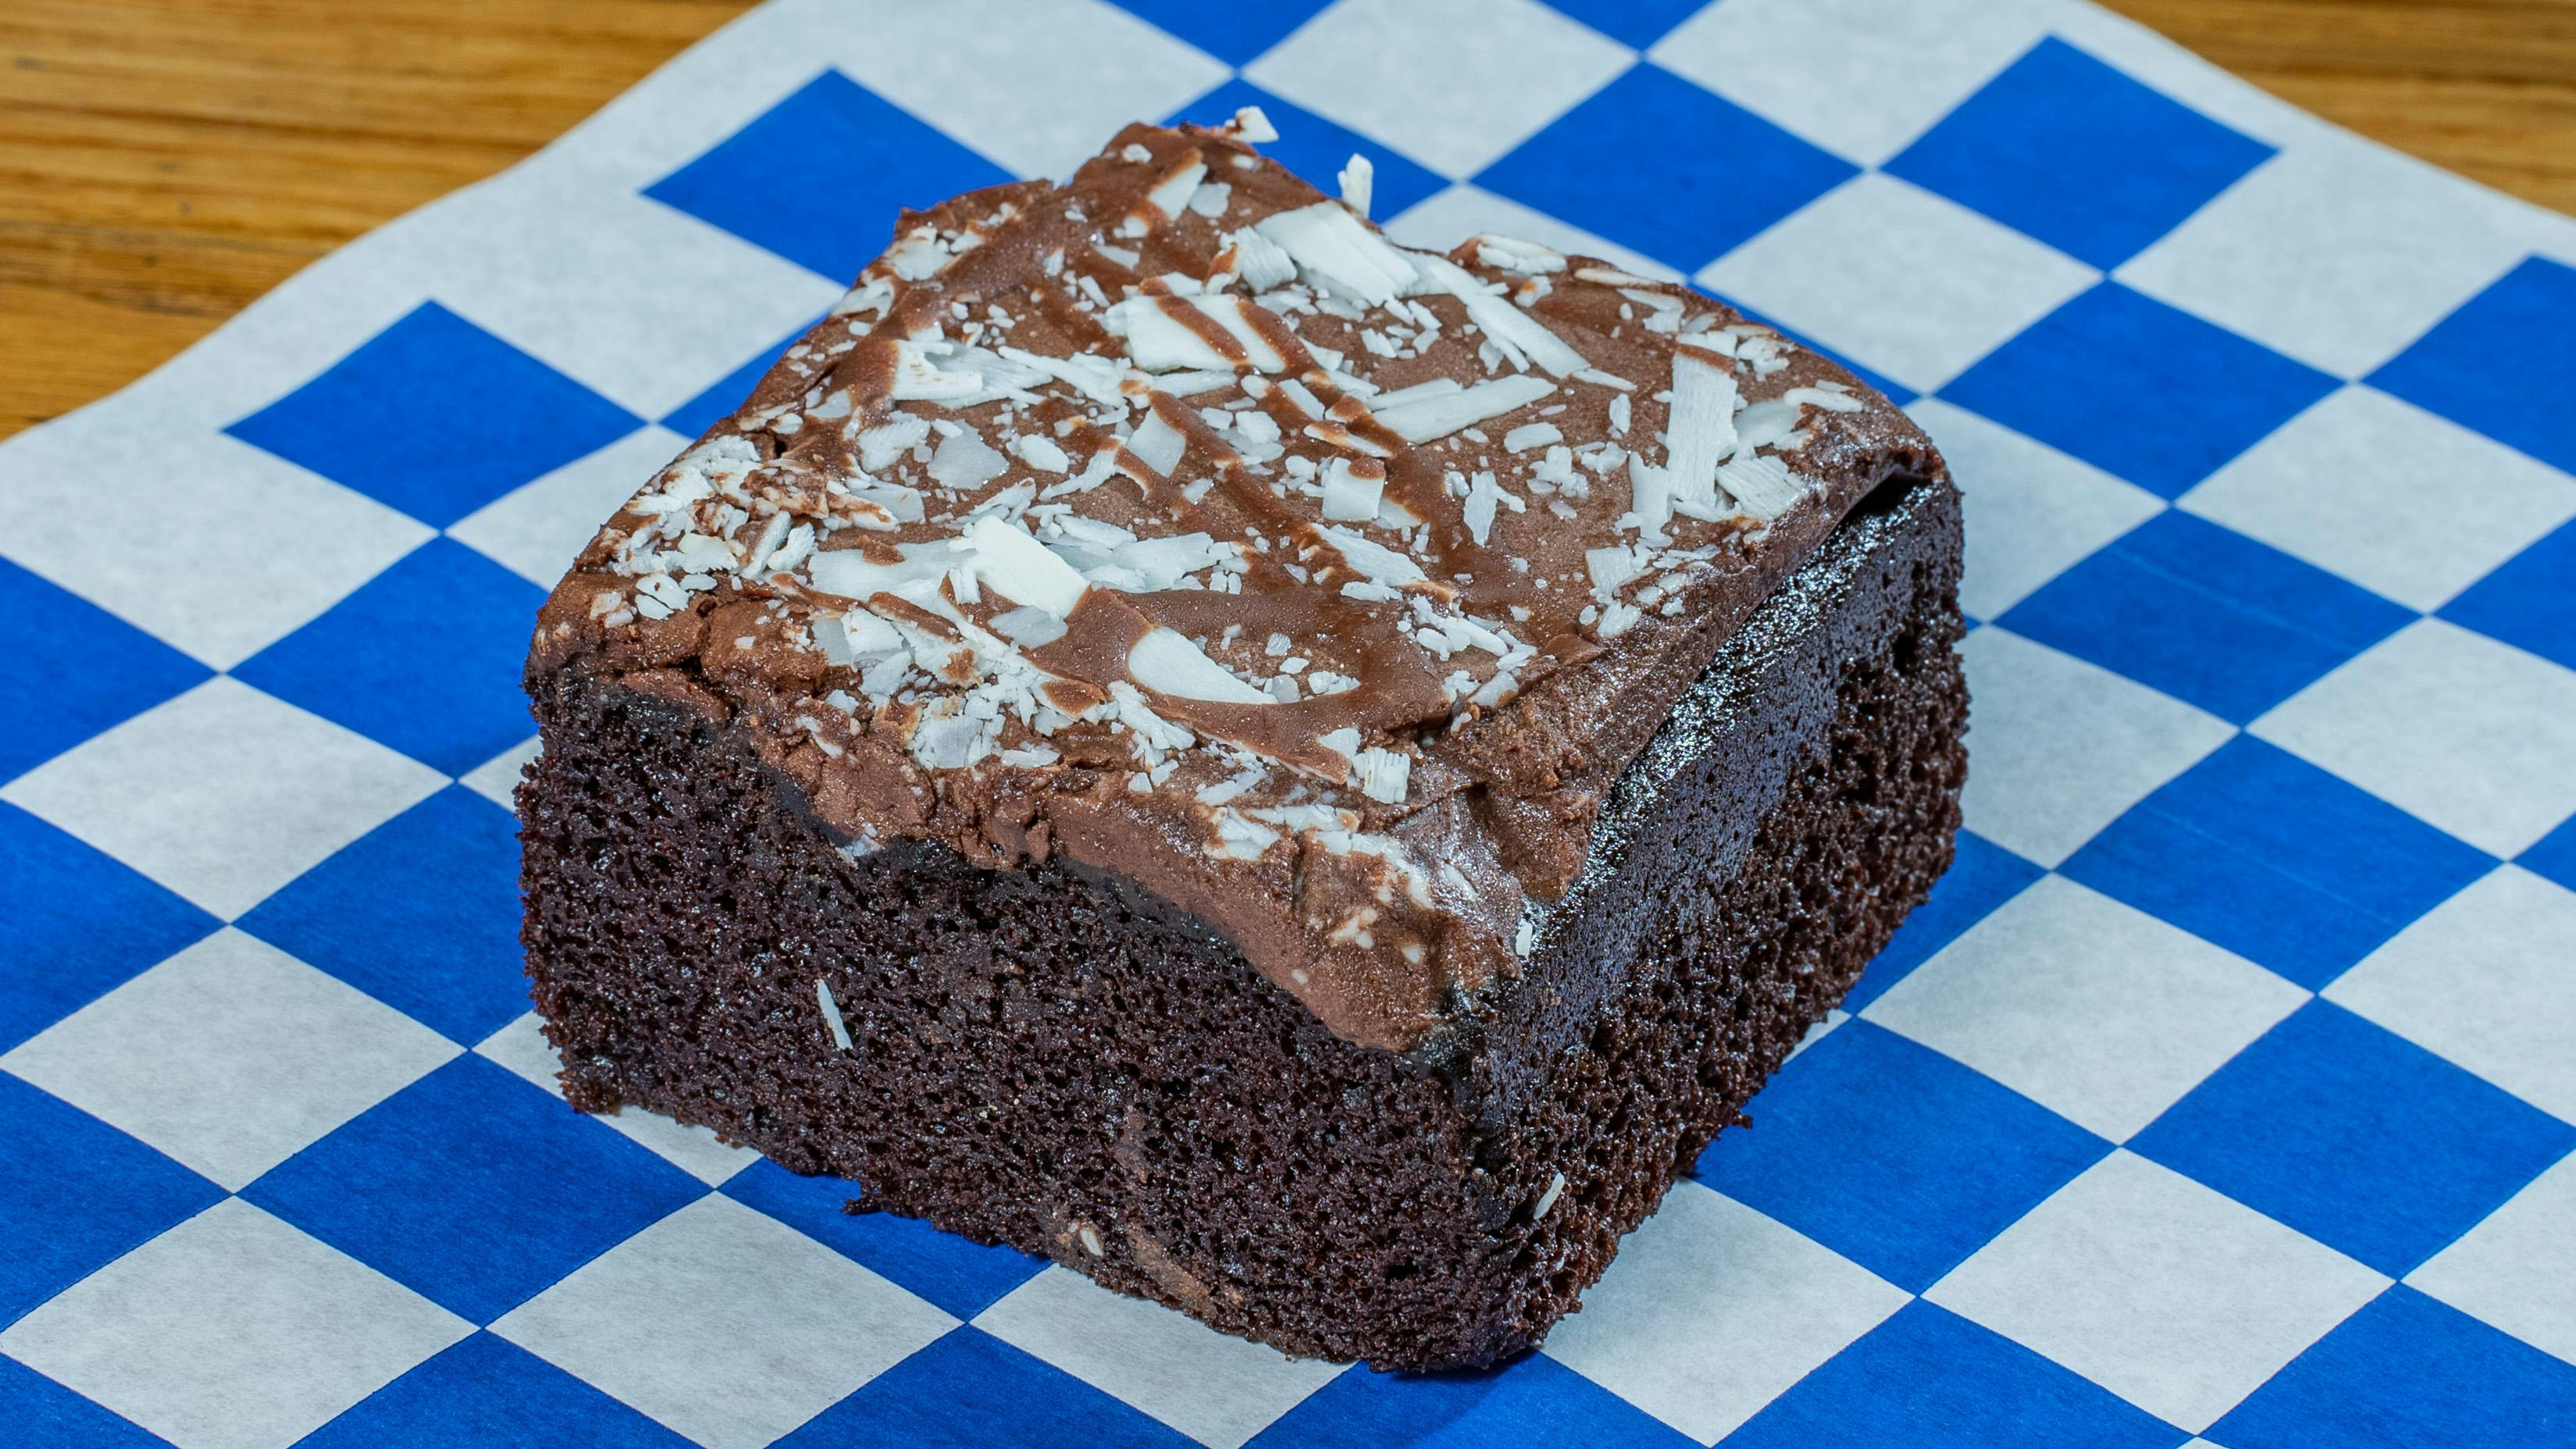 Chocolate Fudge Cake from Austin Burger Company - East 6th St in Austin, TX